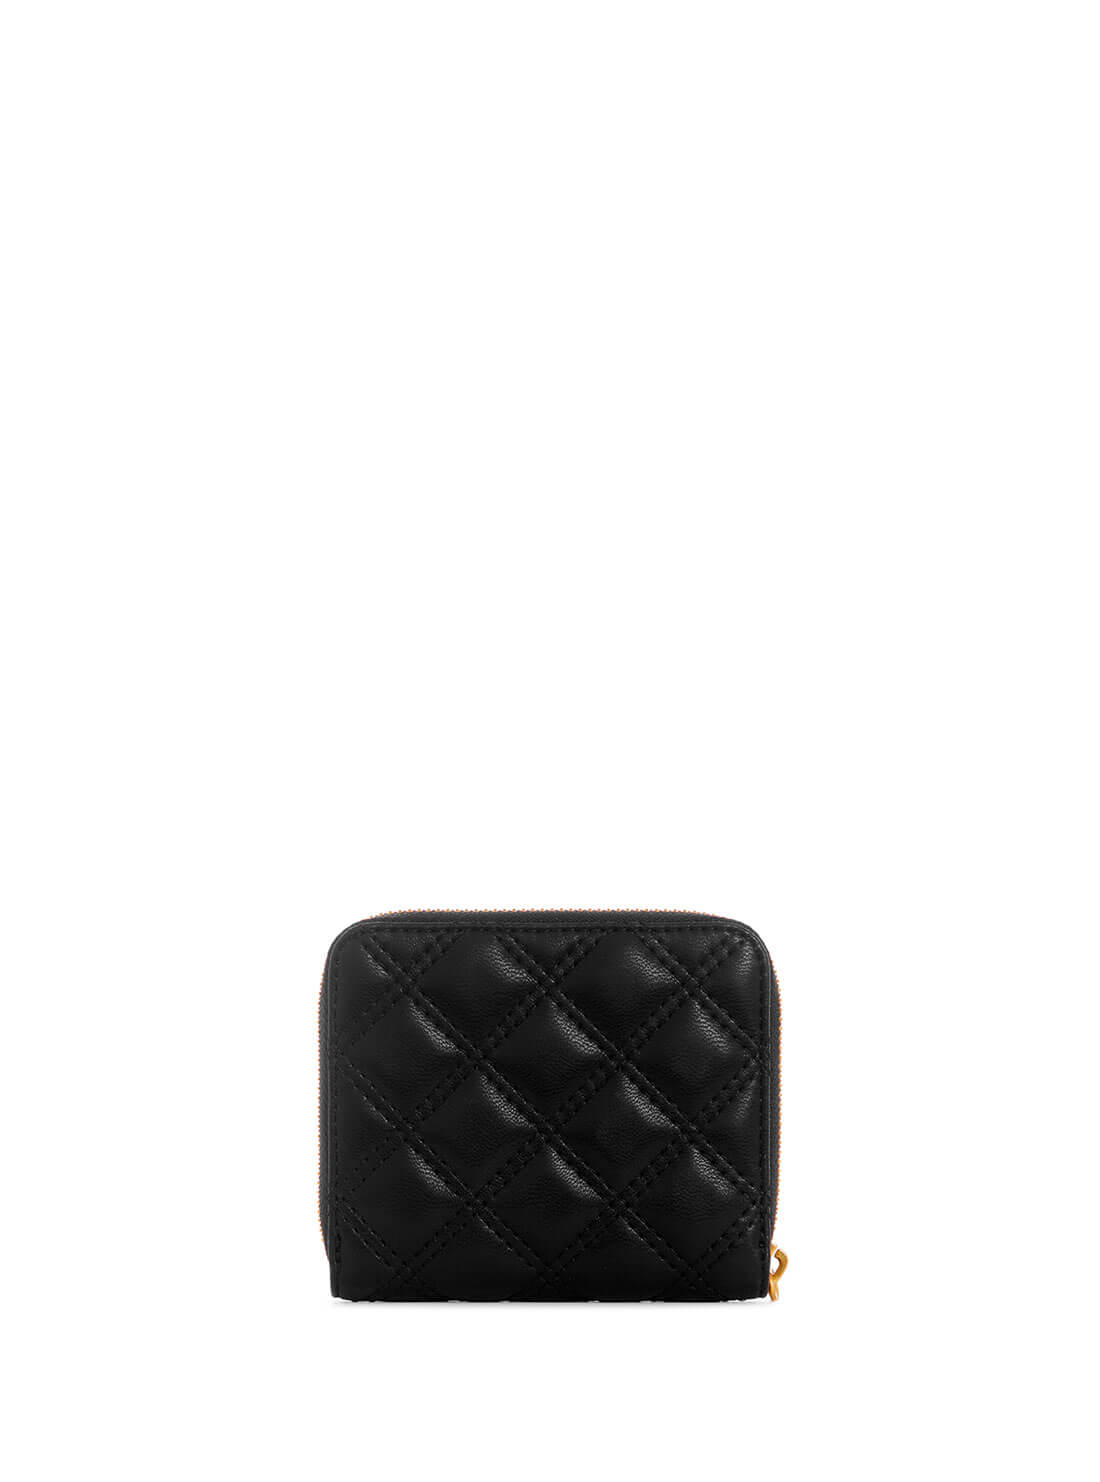 Women's Black Giully Small Zip Wallet back view